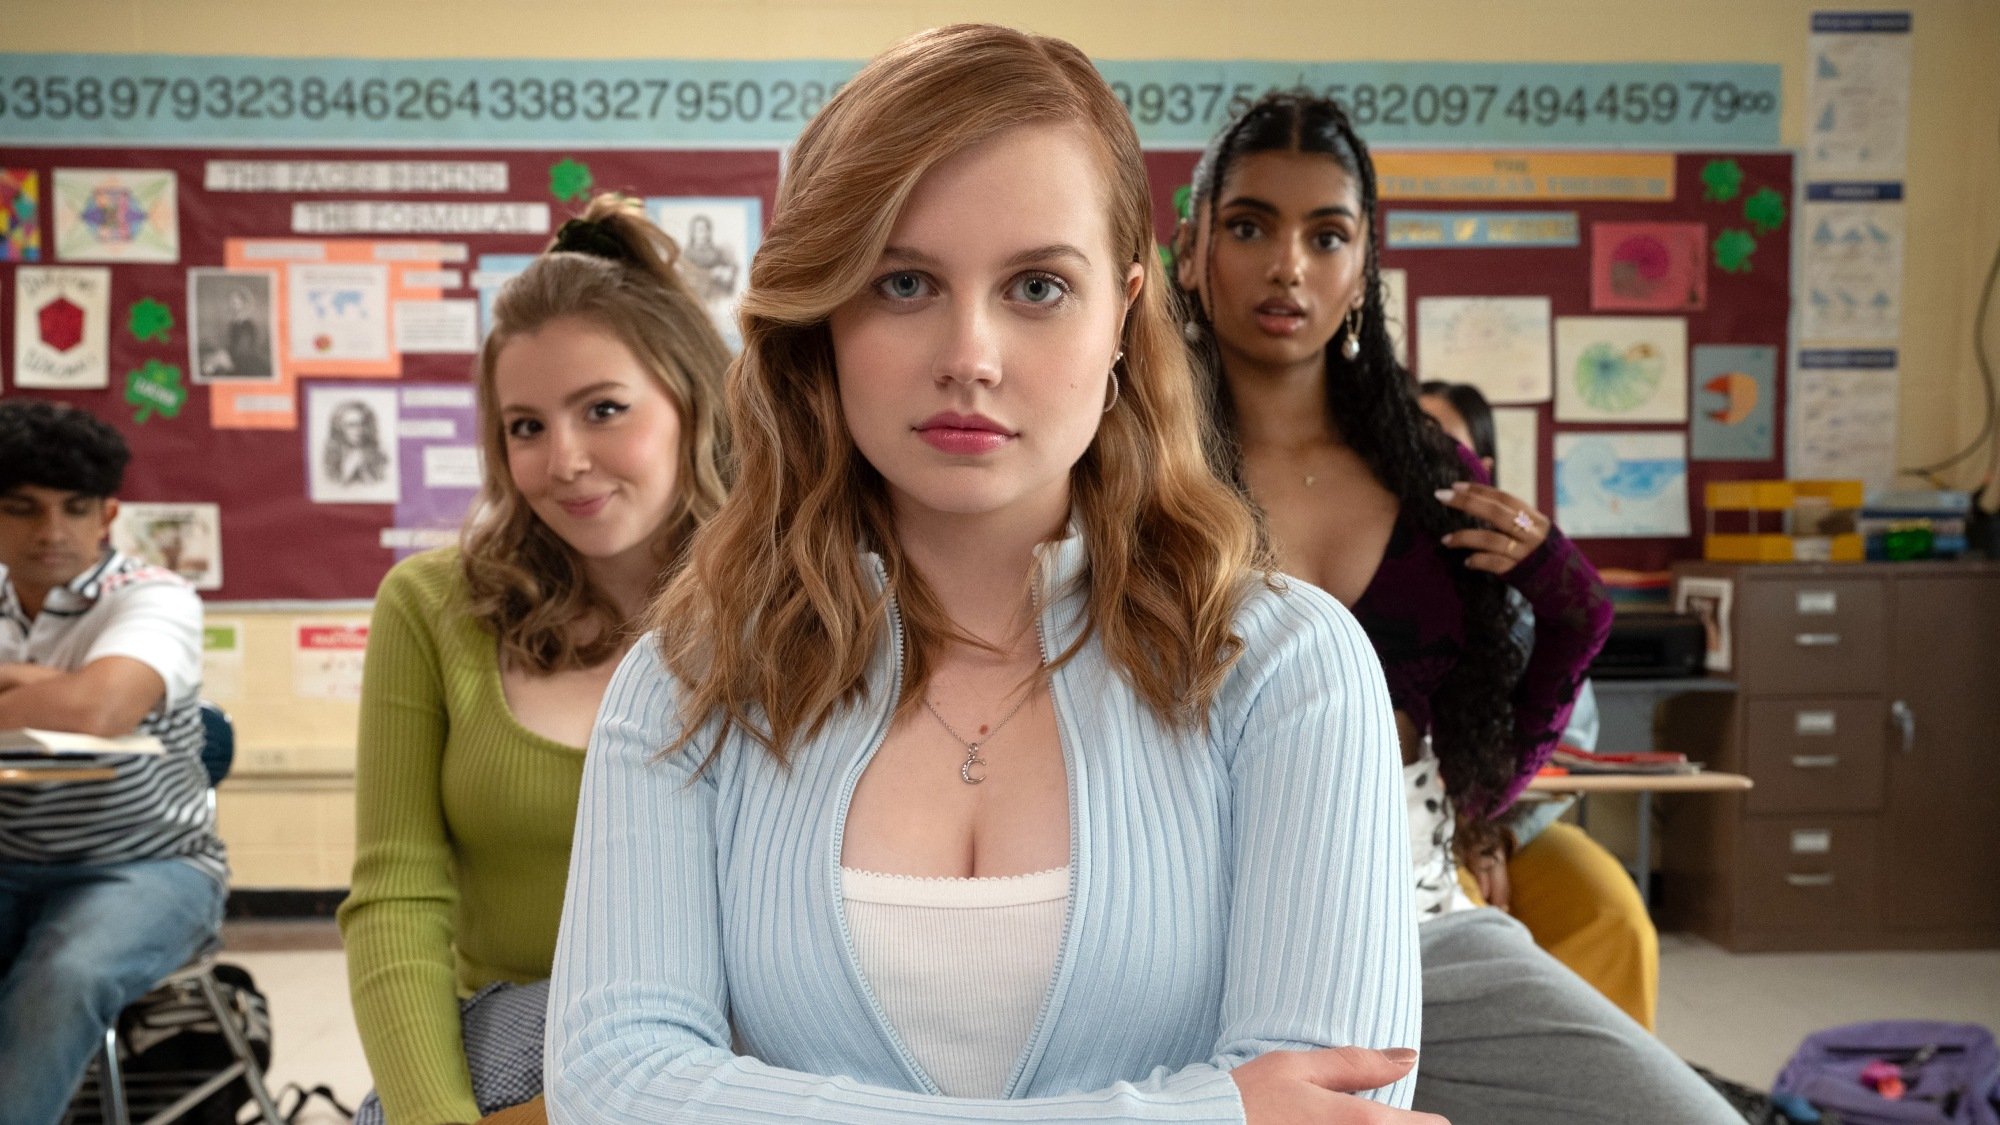 Avantika plays Karen Shetty, Angourie Rice plays Cady Heron, and Bebe Wood plays Gretchen Wieners in "Mean Girls."